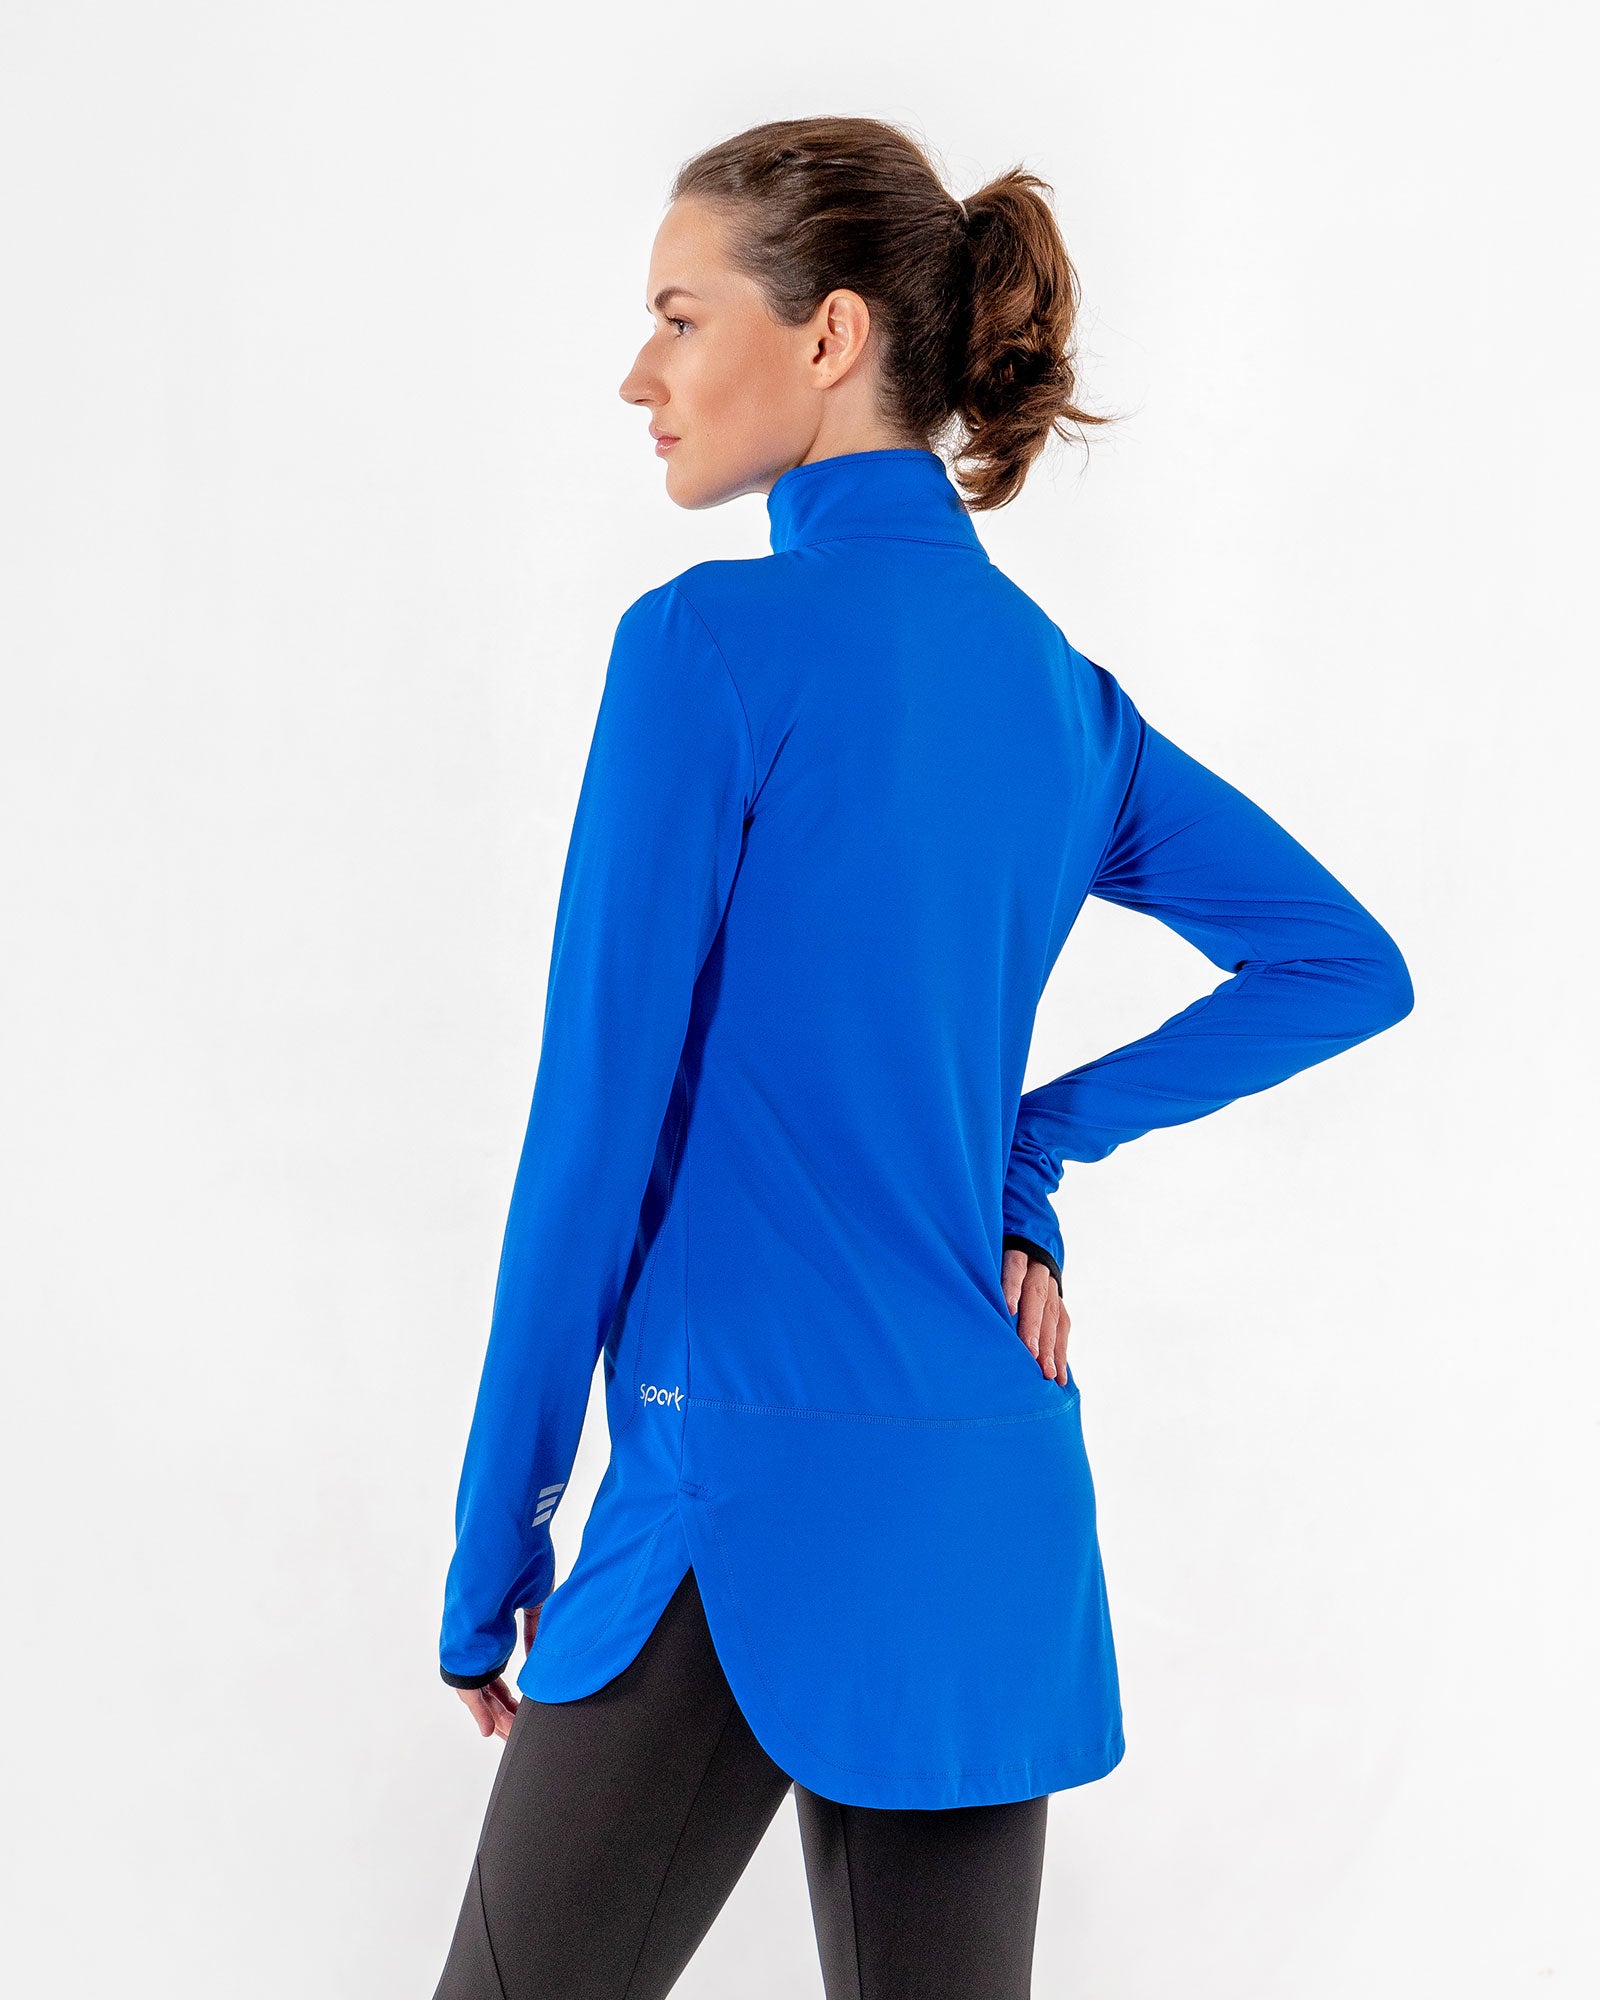 Spark Half-Zip in royal blue by Veil Garments. Modest activewear collection.